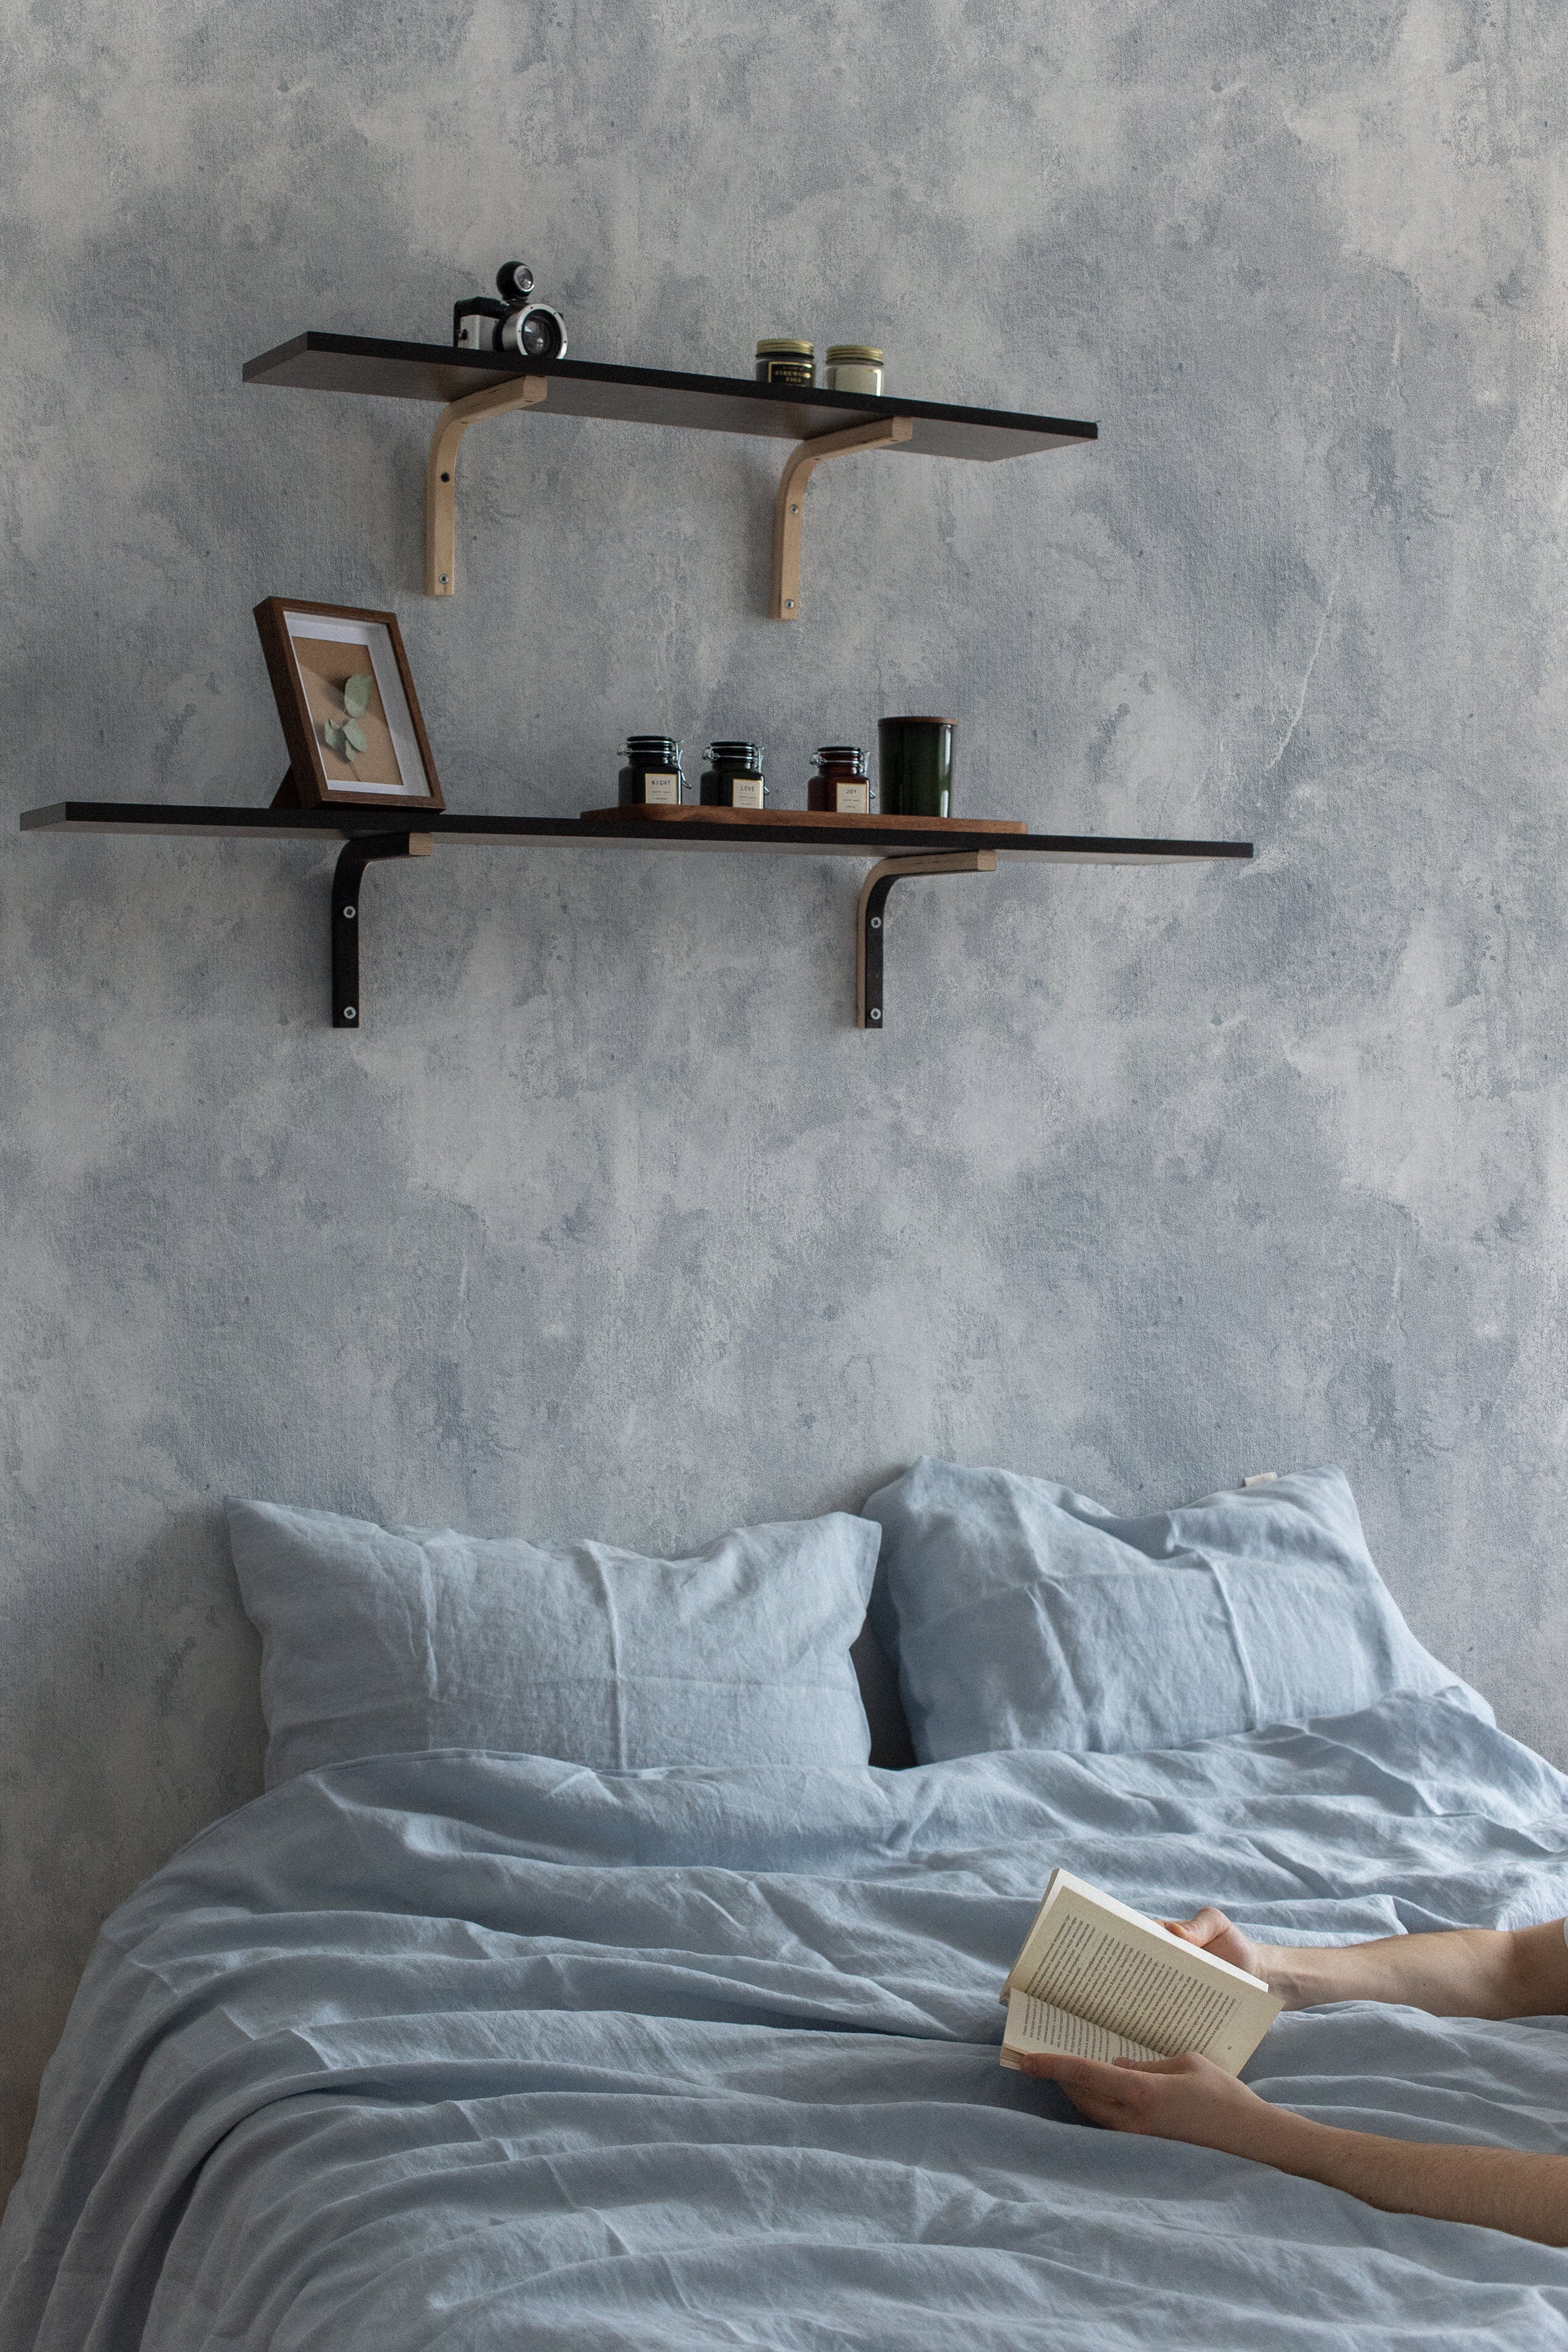 a bedroom scene where the Blue Limewash Wallpaper is applied on the wall behind a bed. The wallpaper's muted blue tones complement the linen bedding, enhancing the relaxed ambiance of the room. Two wooden shelves mounted on the wall display a simple arrangement of picture frames and jars, reinforcing the minimalist and serene aesthetic.